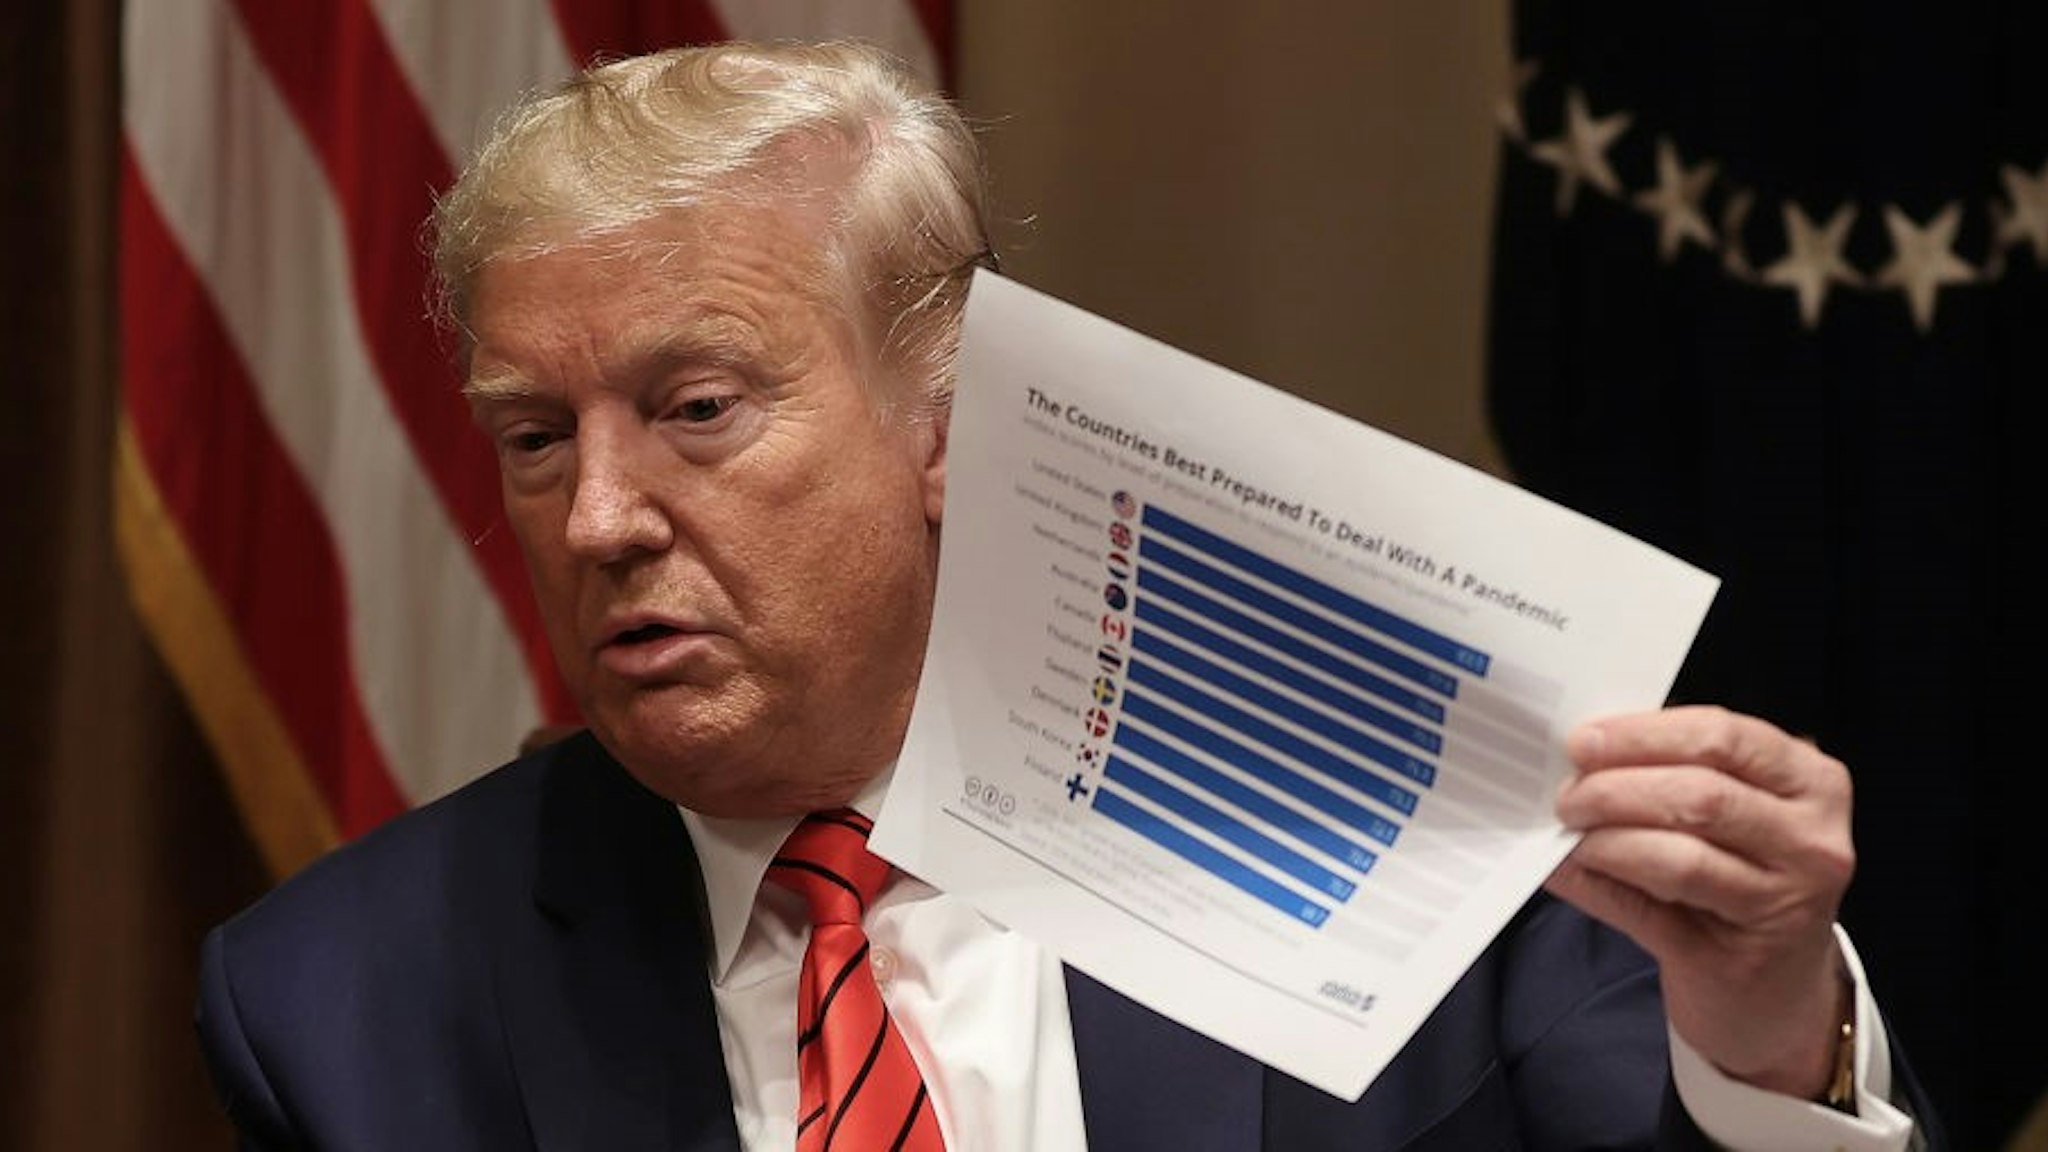 WASHINGTON, DC - FEBRUARY 27: U.S. President Donald Trump holds up a graphic from a study he says names the United States as the country most prepared to handle a pandemic during a news conference and meeting with African American supporters in the Cabinet Room at the White House February 27, 2020 in Washington, DC. The president talked about the economic advances African Americans have made under his administration, about the government's response to the global coronavirus threat and how dishonest he thinks the news media can be to him. He did not answer reporters' questions about the S&amp;P 500 taking its worst loss in almost nine years. (Photo by